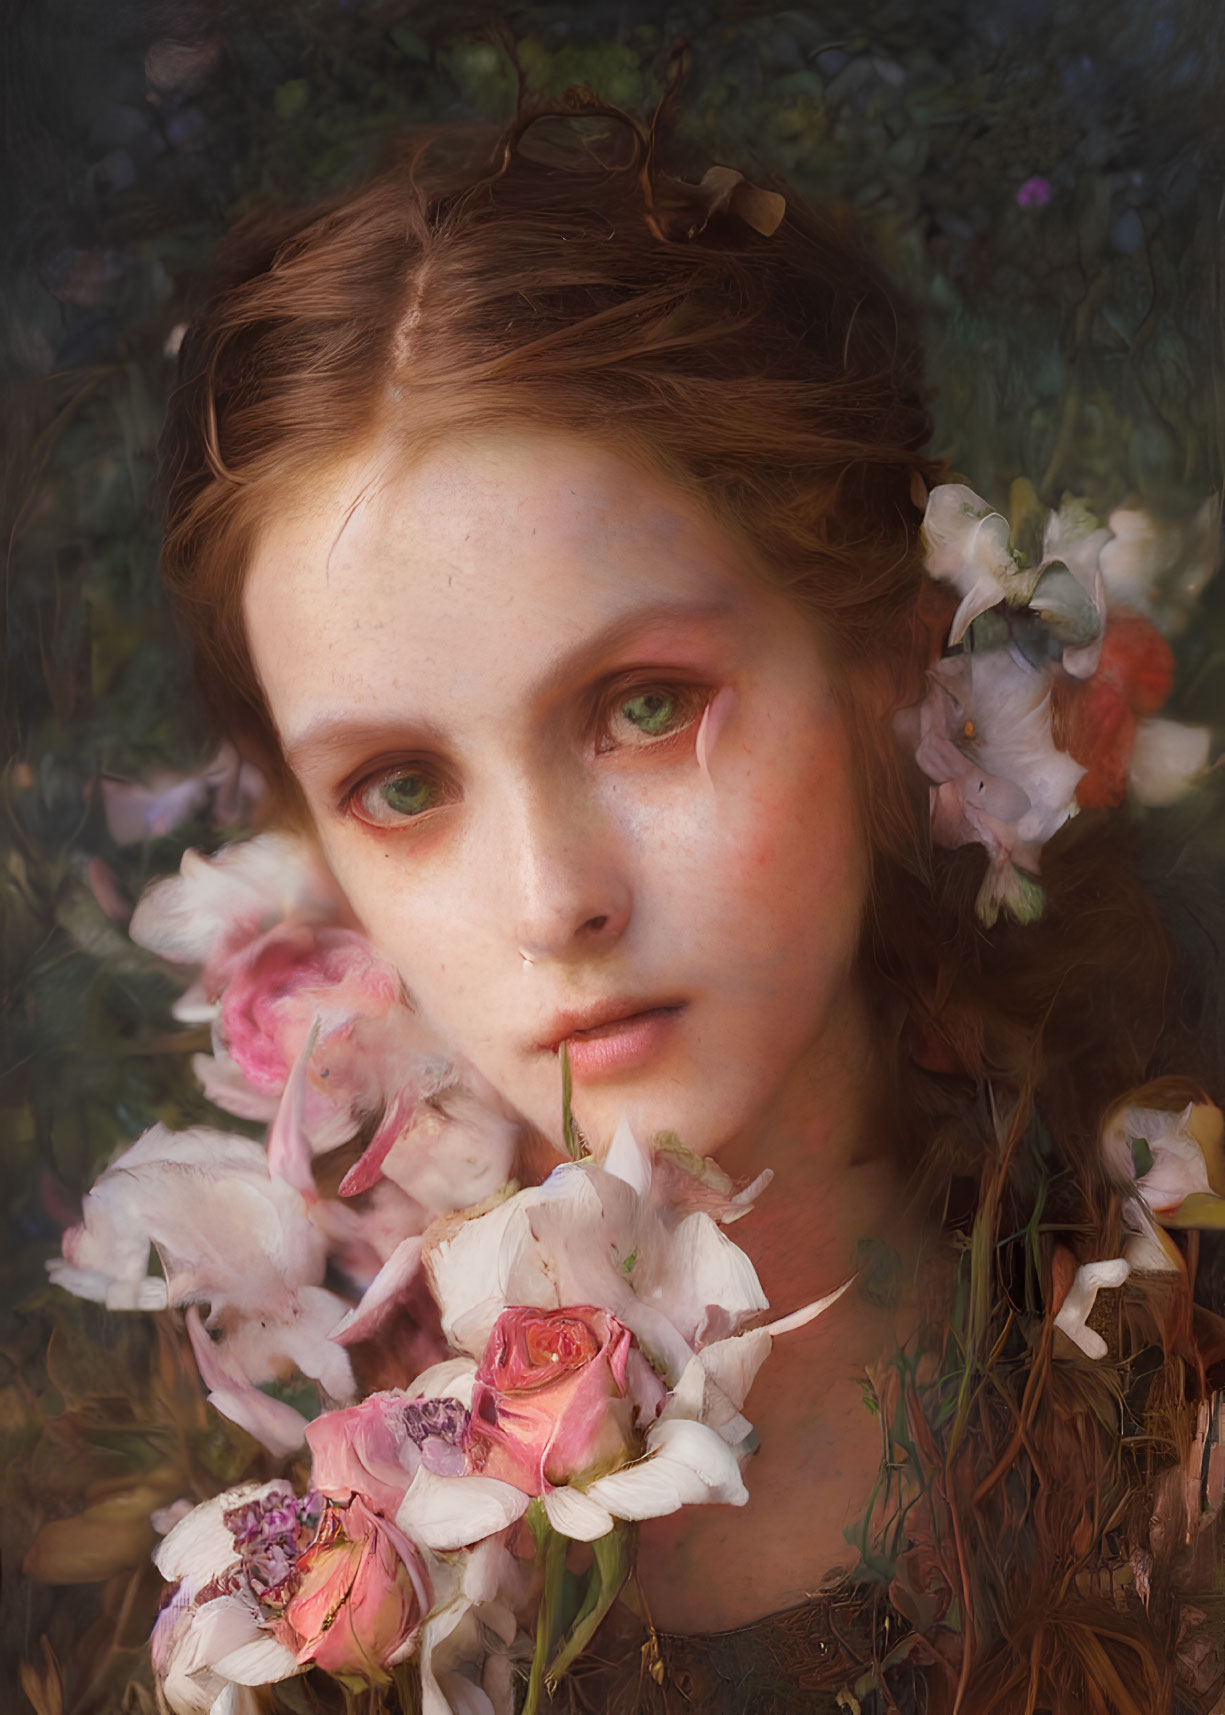 Portrait of young individual with green eyes among pink and white flowers